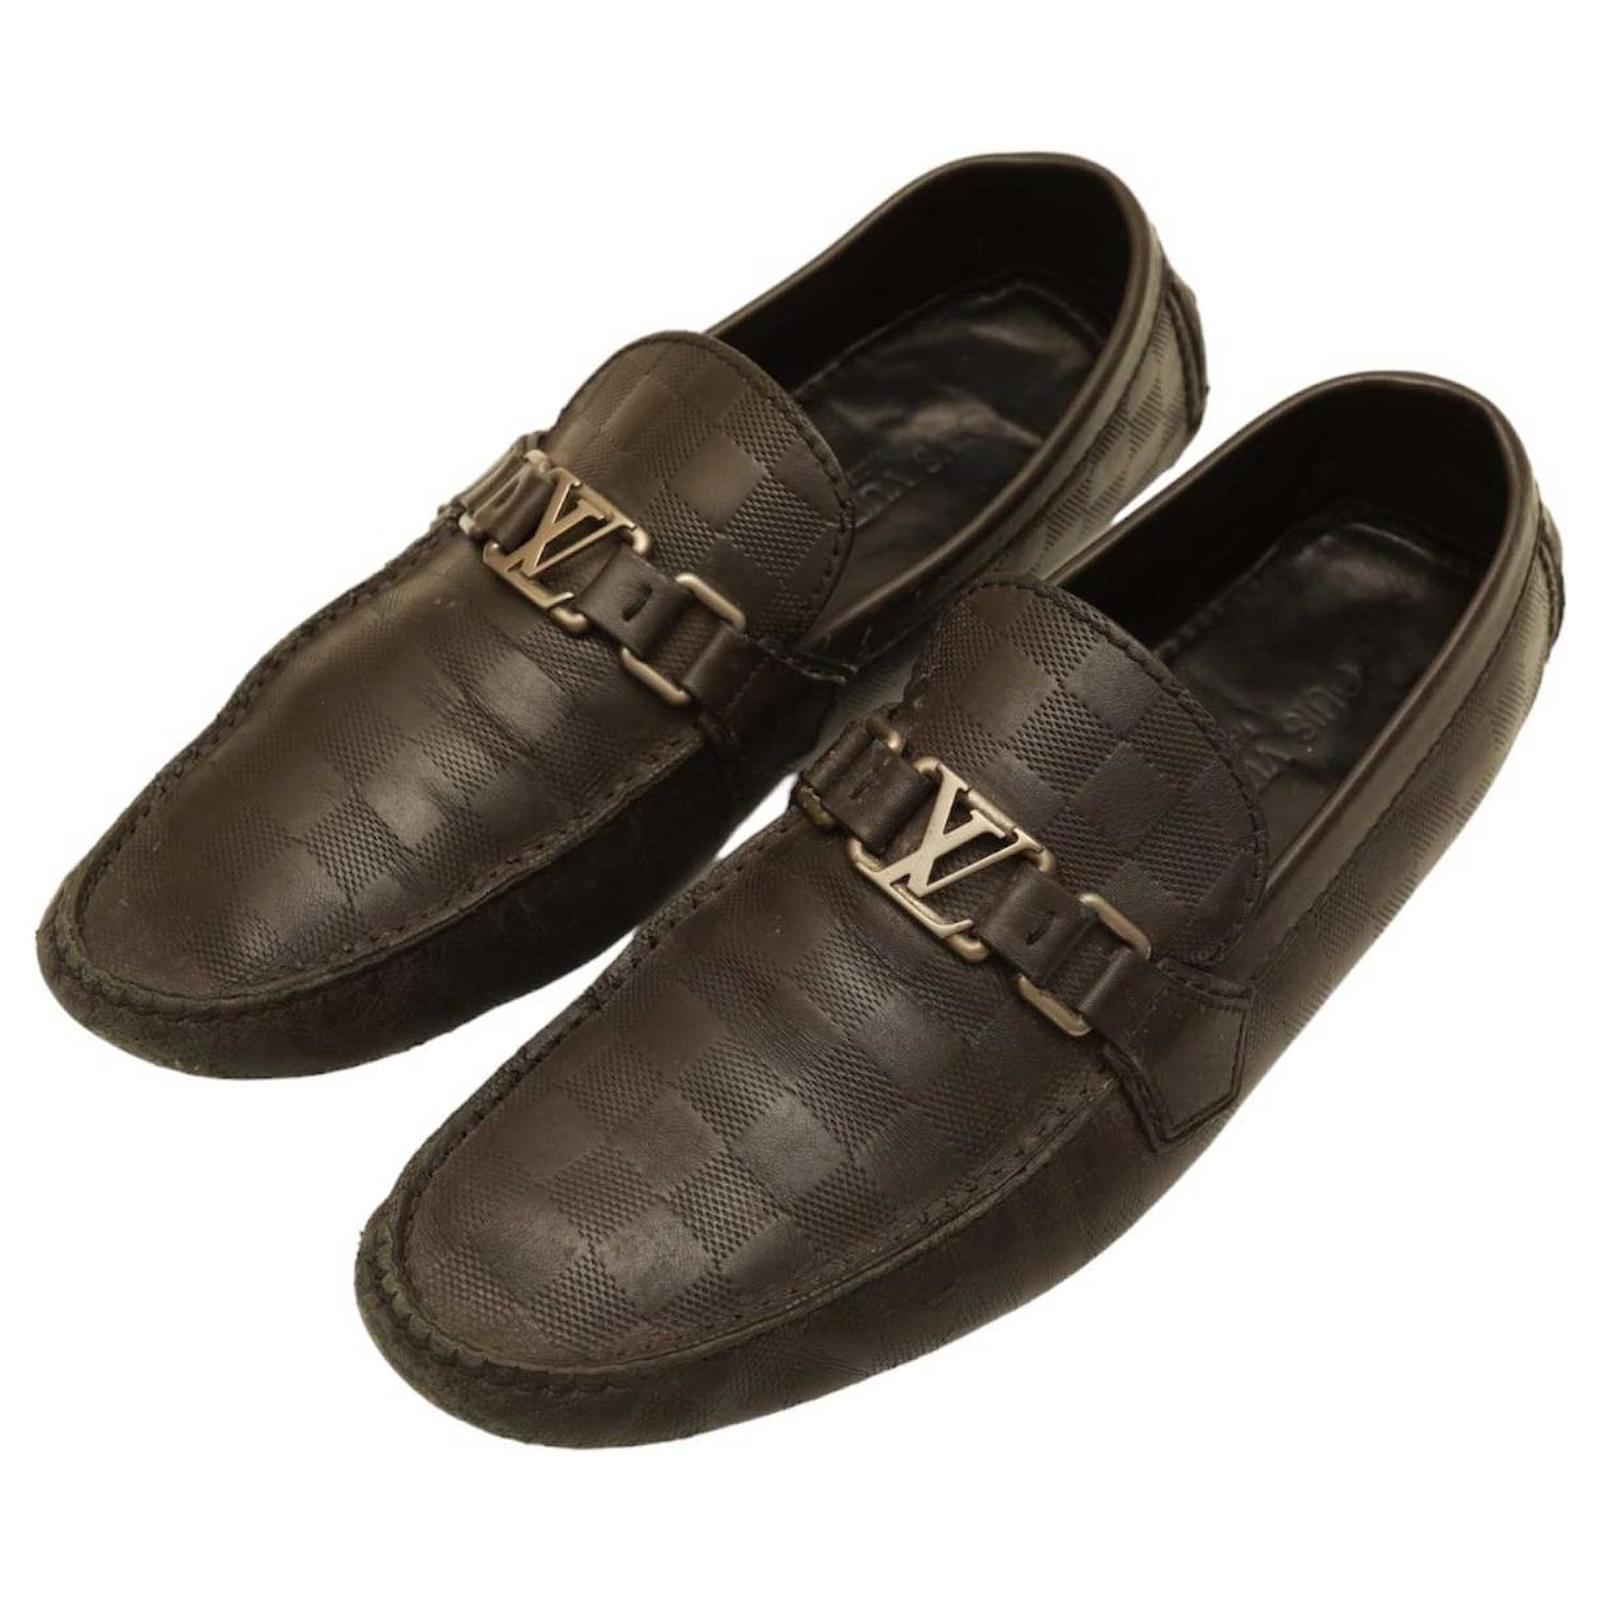 Louis Vuitton lv man shoes leather loafers  Lv men shoes, Louis vuitton  loafers, Dress shoes men